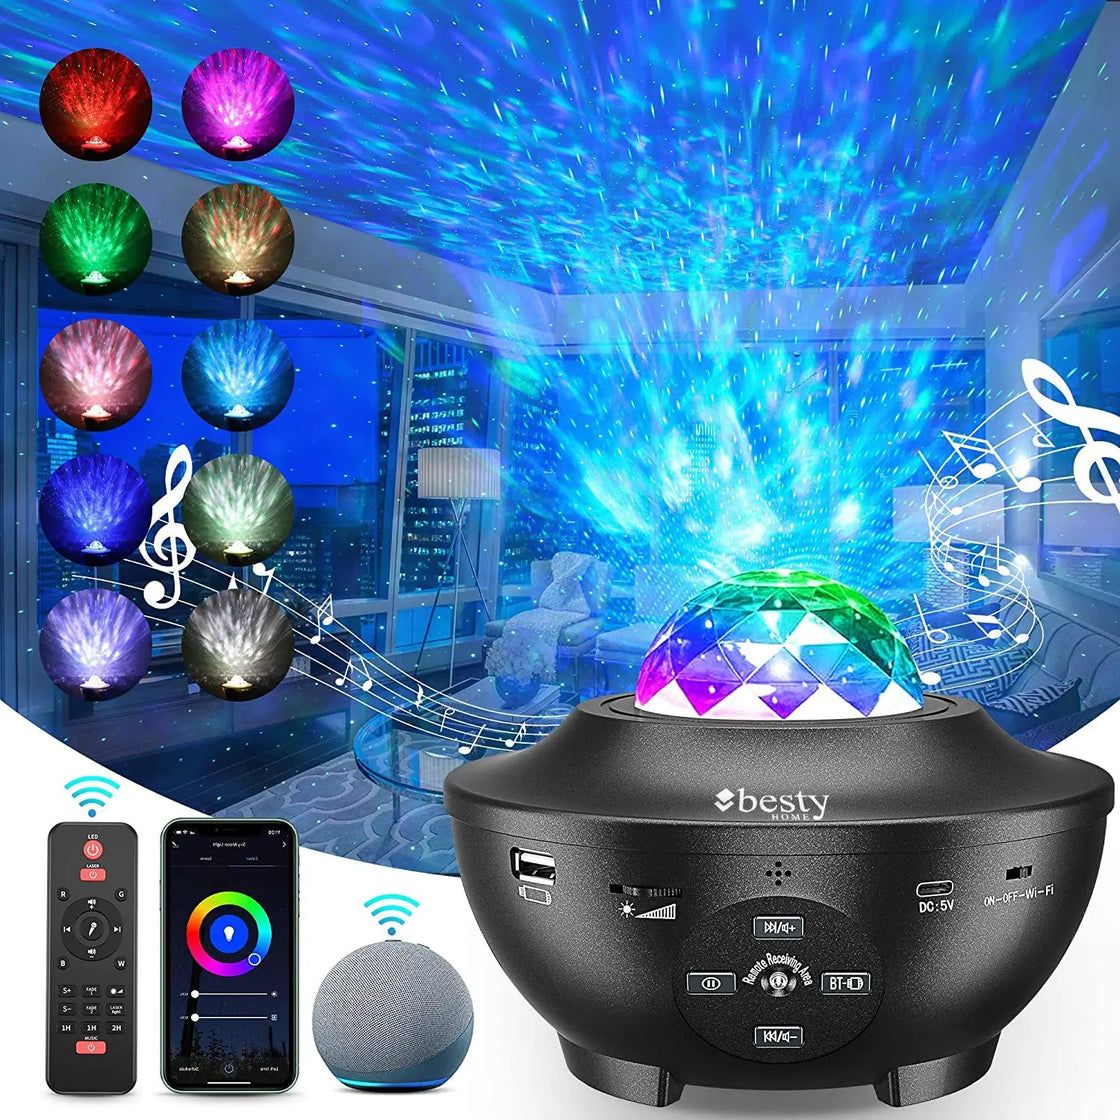 Galaxy Projector Star Projector, Star Night Light Projector for Bedroom  with Bluetooth Speaker, Timer, Remote Control, 10 Color Effects, Alexa 